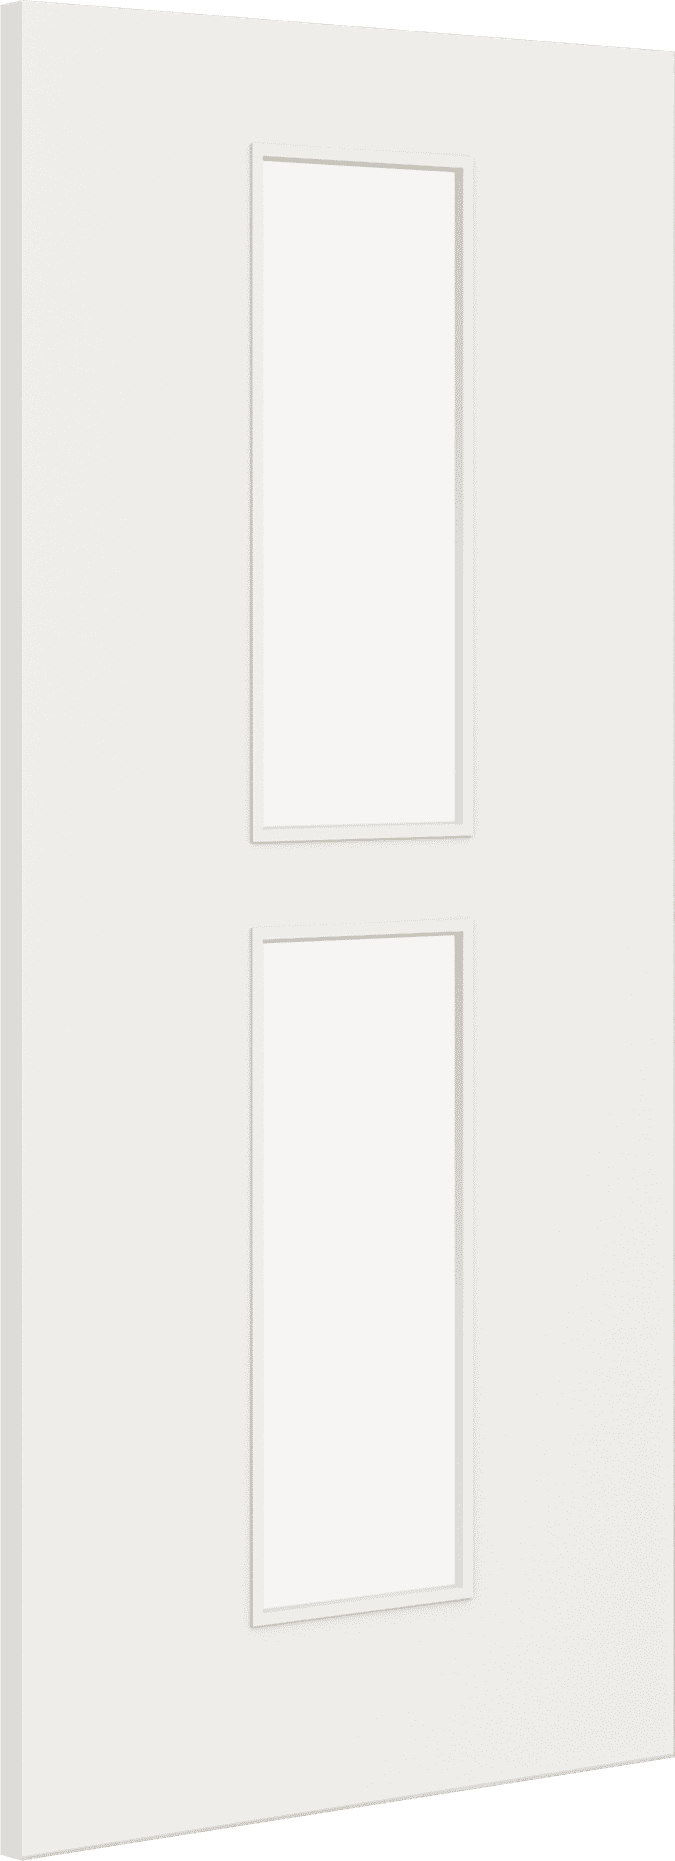 2040mm x 926mm x 44mm Architectural Paint Grade White 12 Clear Glazed Fire Door Blank